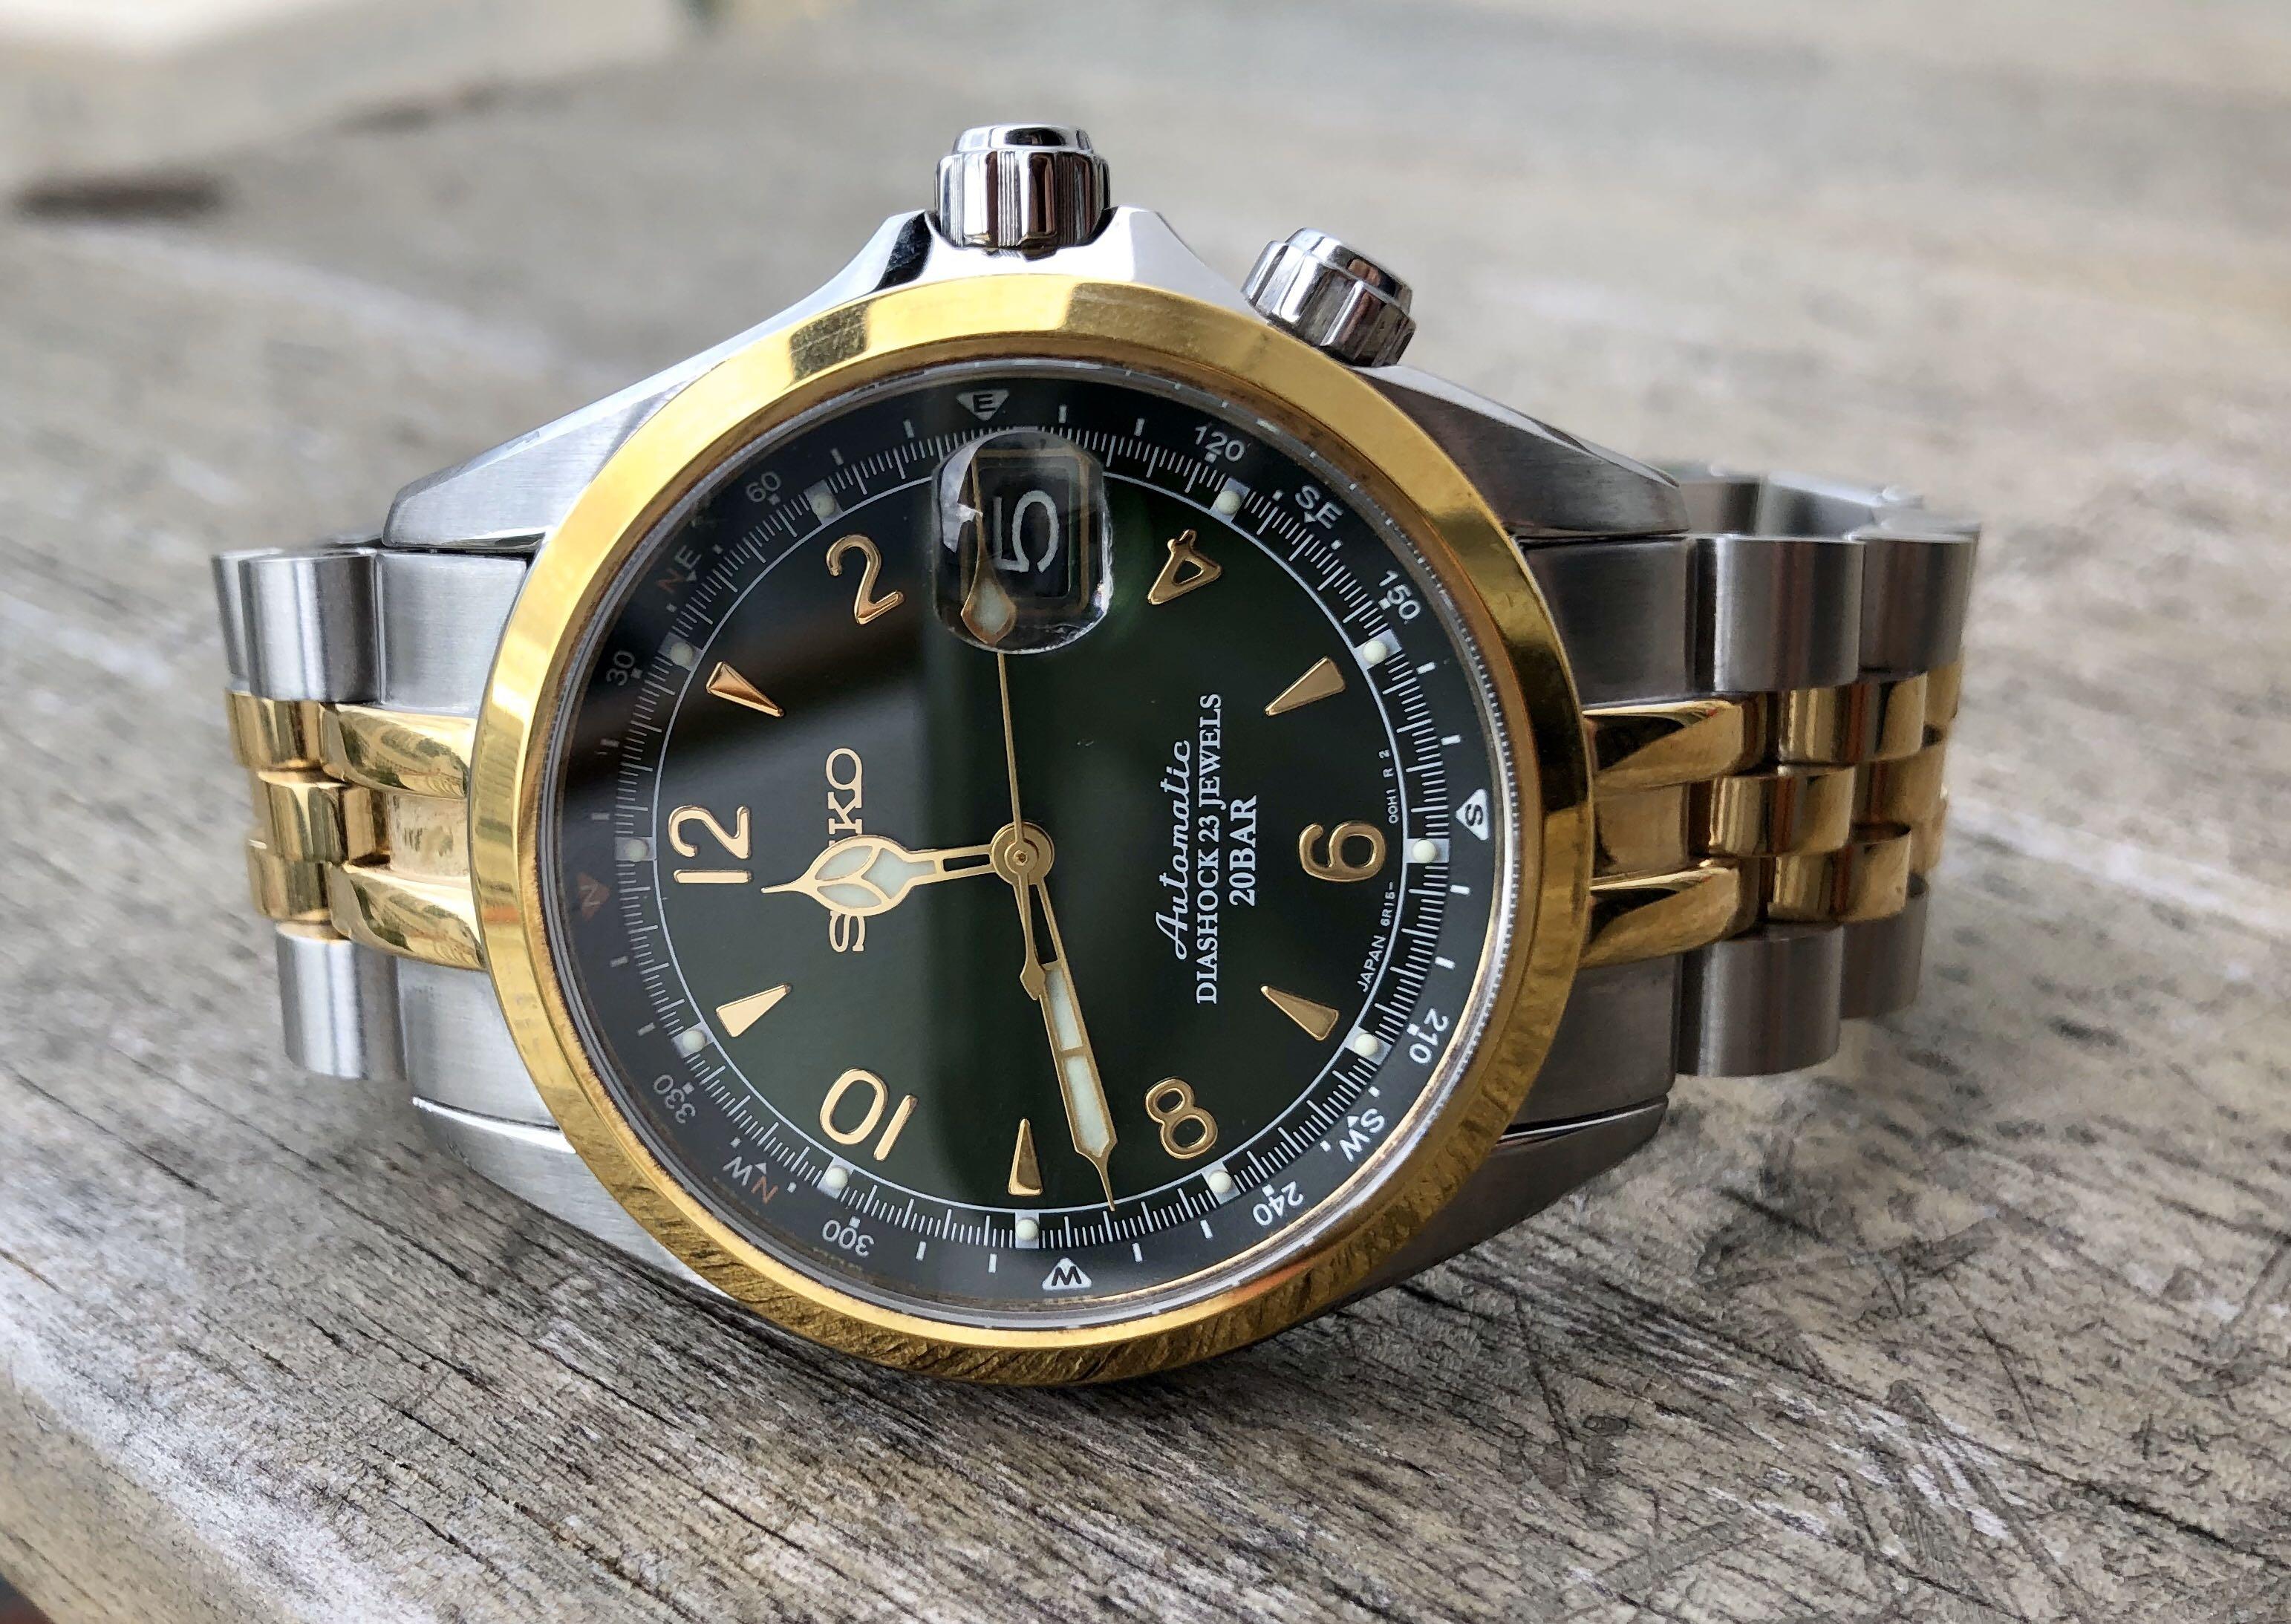 Seiko Alpinist Green with 2 tone strapcode jubilee bracelet, Mobile Phones  & Gadgets, Wearables & Smart Watches on Carousell